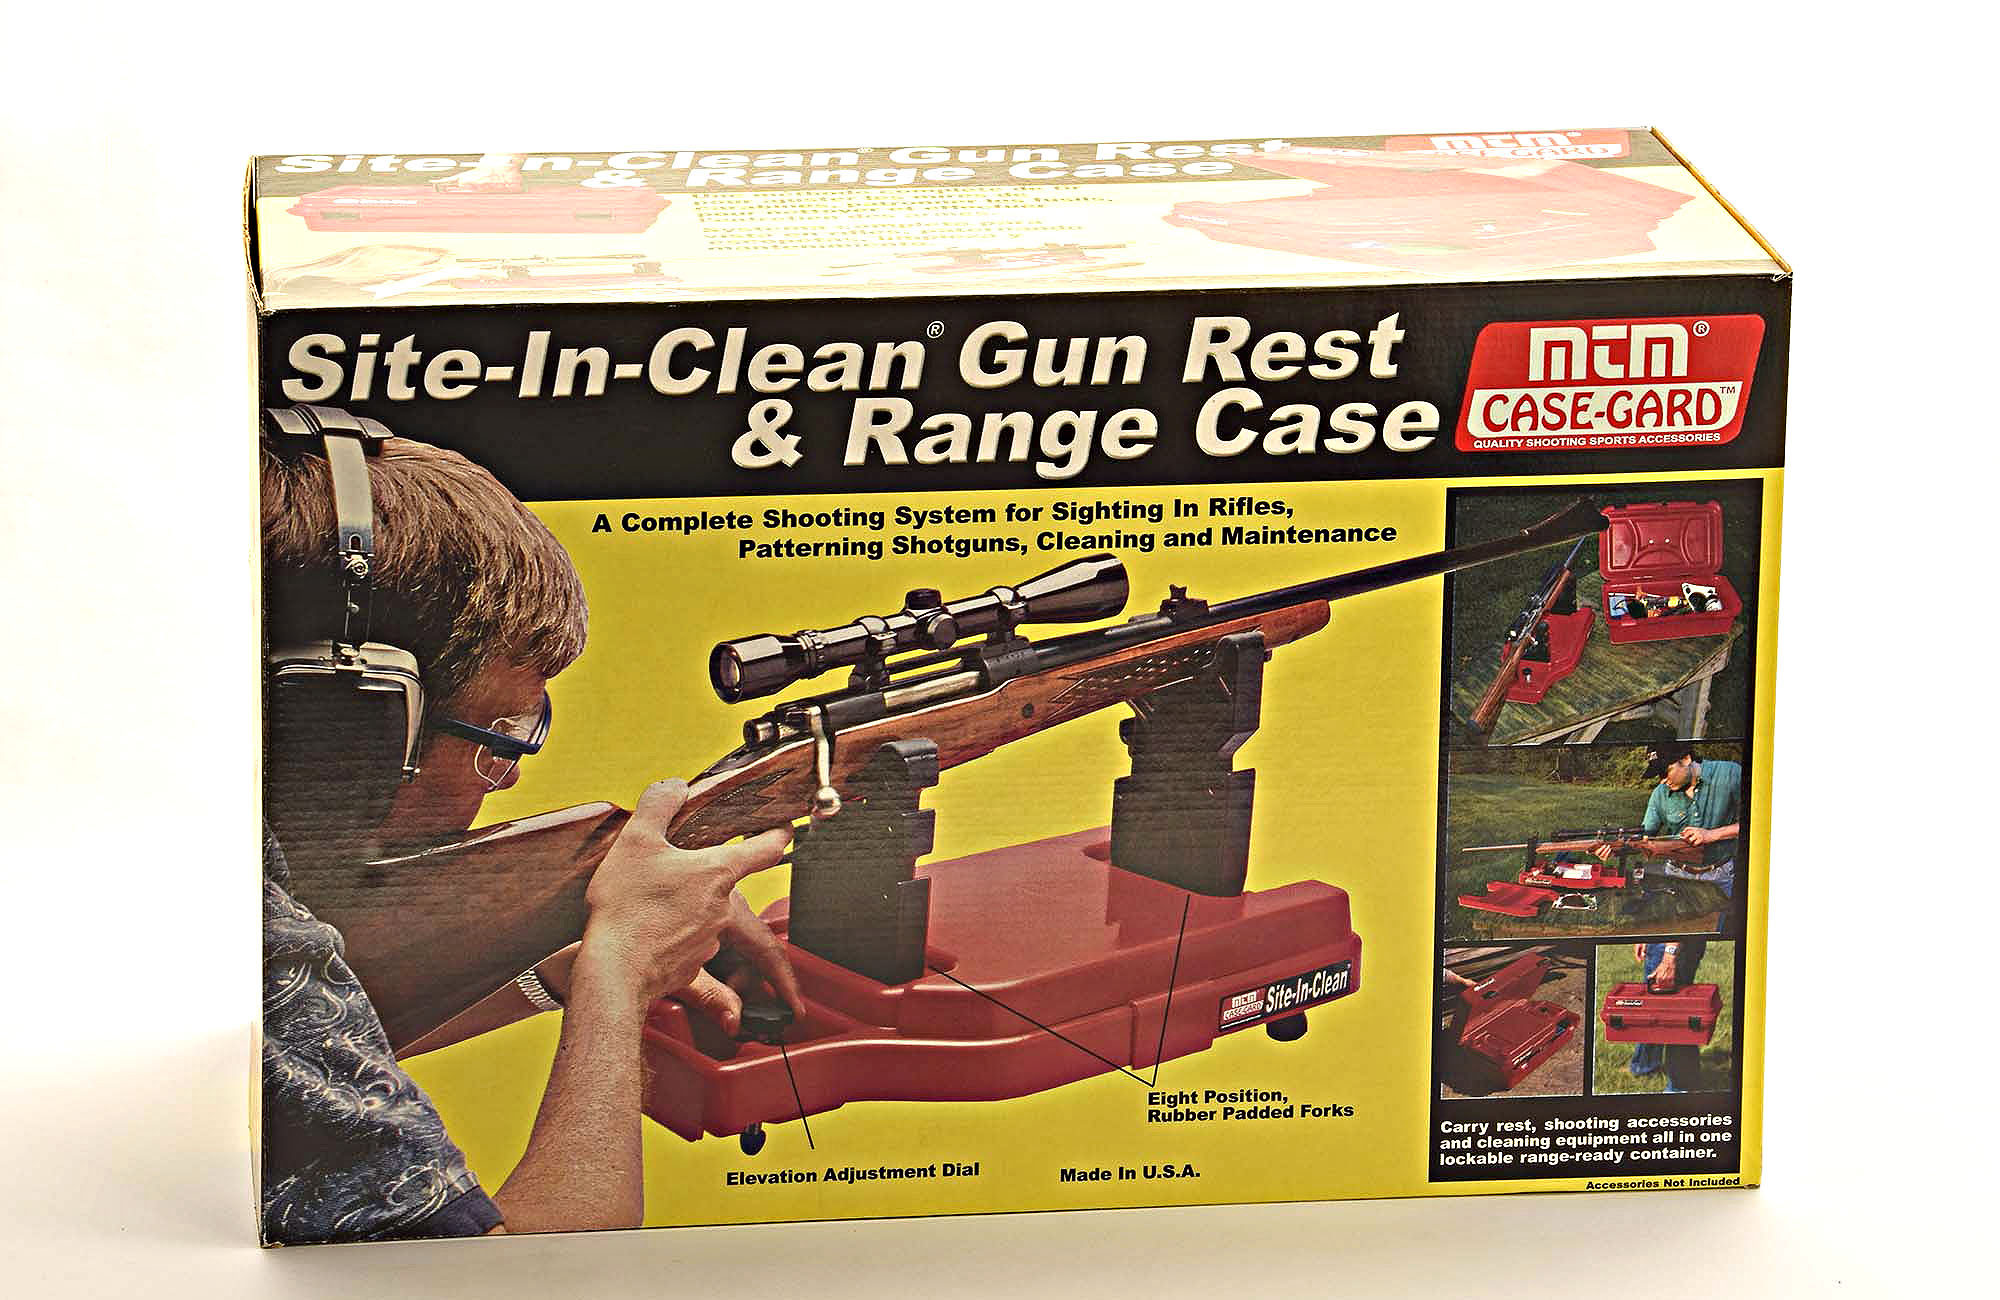 GV Gun Rifle Nettoyage observation Vice reste stand by MTM Organiser 